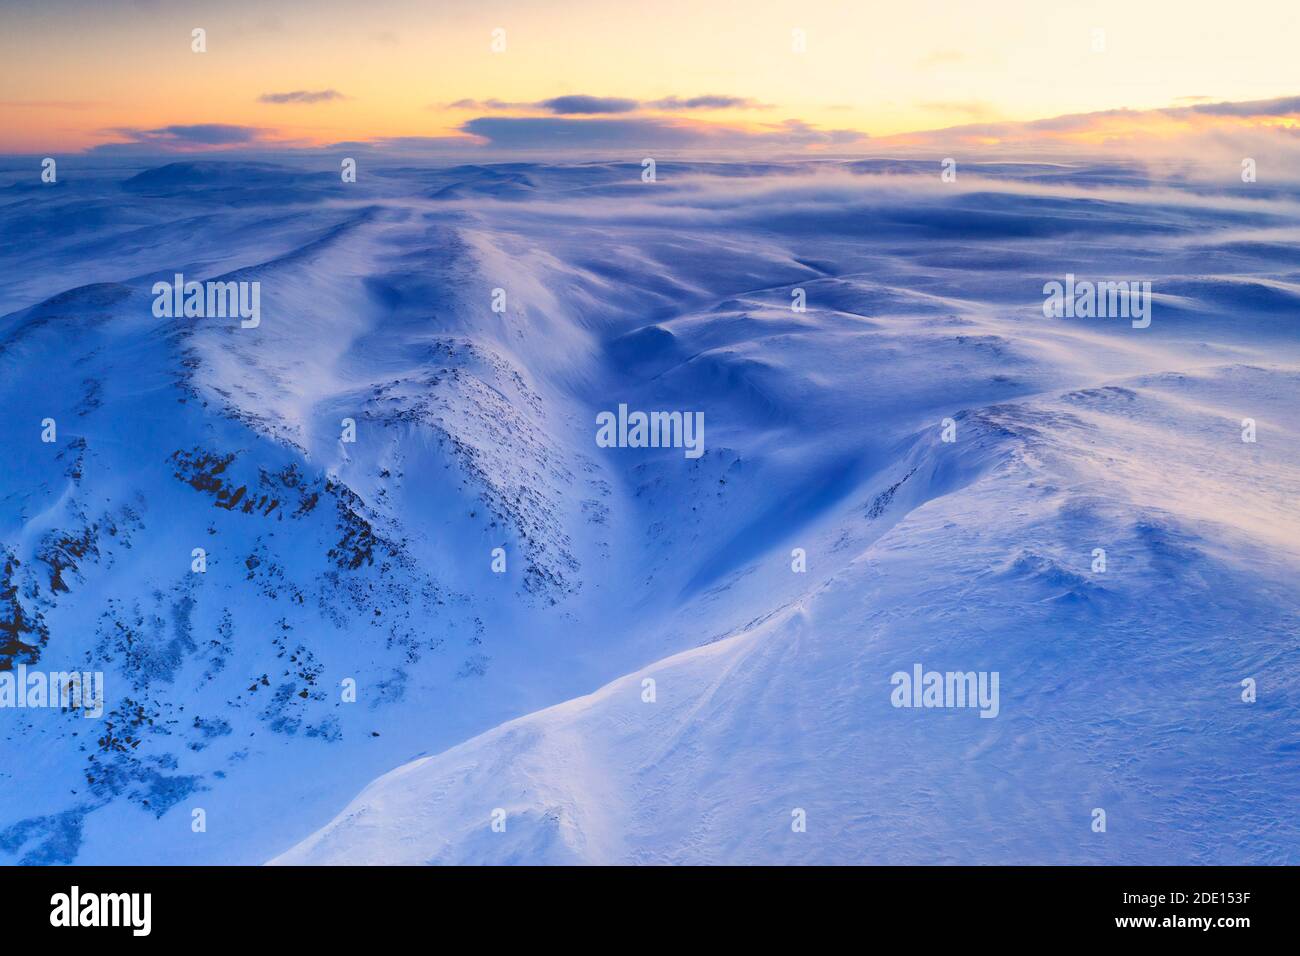 Fresh snow shaped by the cold Arctic wind blowing over mountains at dawn, Tana, Troms og Finnmark, Northern Norway, Scandinavia, Europe Stock Photo